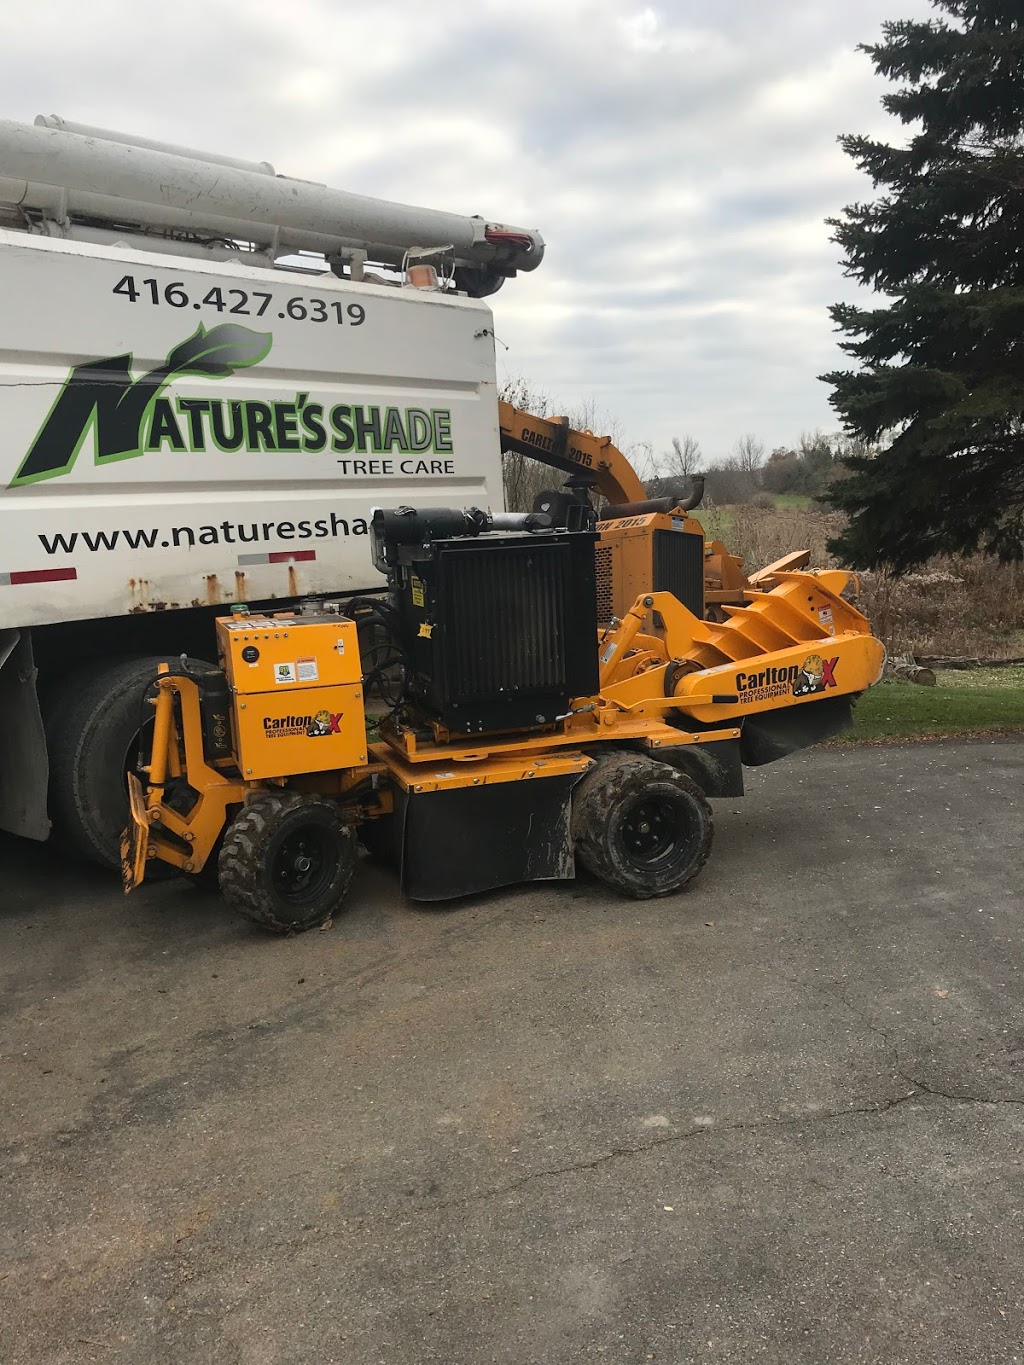 Natures Shade Tree Care | 50 Queen St, Schomberg, ON L0G 1T0, Canada | Phone: (416) 427-6319